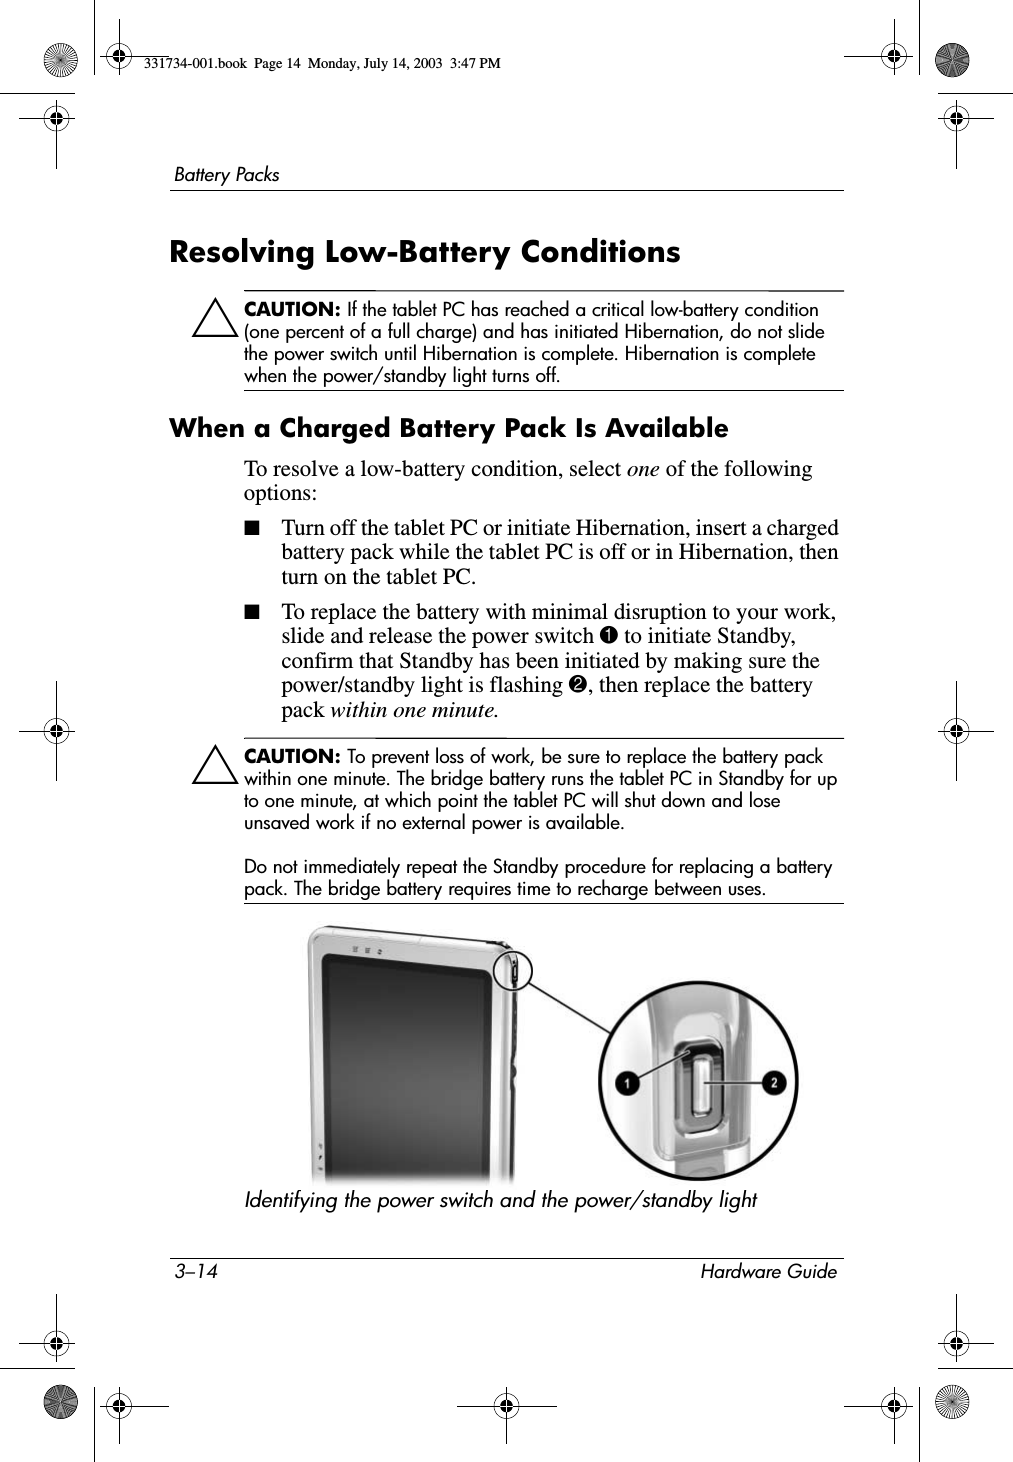 3–14 Hardware GuideBattery PacksResolving Low-Battery ConditionsÄCAUTION: If the tablet PC has reached a critical low-battery condition (one percent of a full charge) and has initiated Hibernation, do not slide the power switch until Hibernation is complete. Hibernation is complete when the power/standby light turns off.When a Charged Battery Pack Is AvailableTo resolve a low-battery condition, select one of the following options:■Turn off the tablet PC or initiate Hibernation, insert a charged battery pack while the tablet PC is off or in Hibernation, then turn on the tablet PC.■To replace the battery with minimal disruption to your work, slide and release the power switch 1 to initiate Standby, confirm that Standby has been initiated by making sure the power/standby light is flashing 2, then replace the battery pack within one minute.ÄCAUTION: To prevent loss of work, be sure to replace the battery pack within one minute. The bridge battery runs the tablet PC in Standby for up to one minute, at which point the tablet PC will shut down and lose unsaved work if no external power is available. Do not immediately repeat the Standby procedure for replacing a battery pack. The bridge battery requires time to recharge between uses.Identifying the power switch and the power/standby light331734-001.book  Page 14  Monday, July 14, 2003  3:47 PM